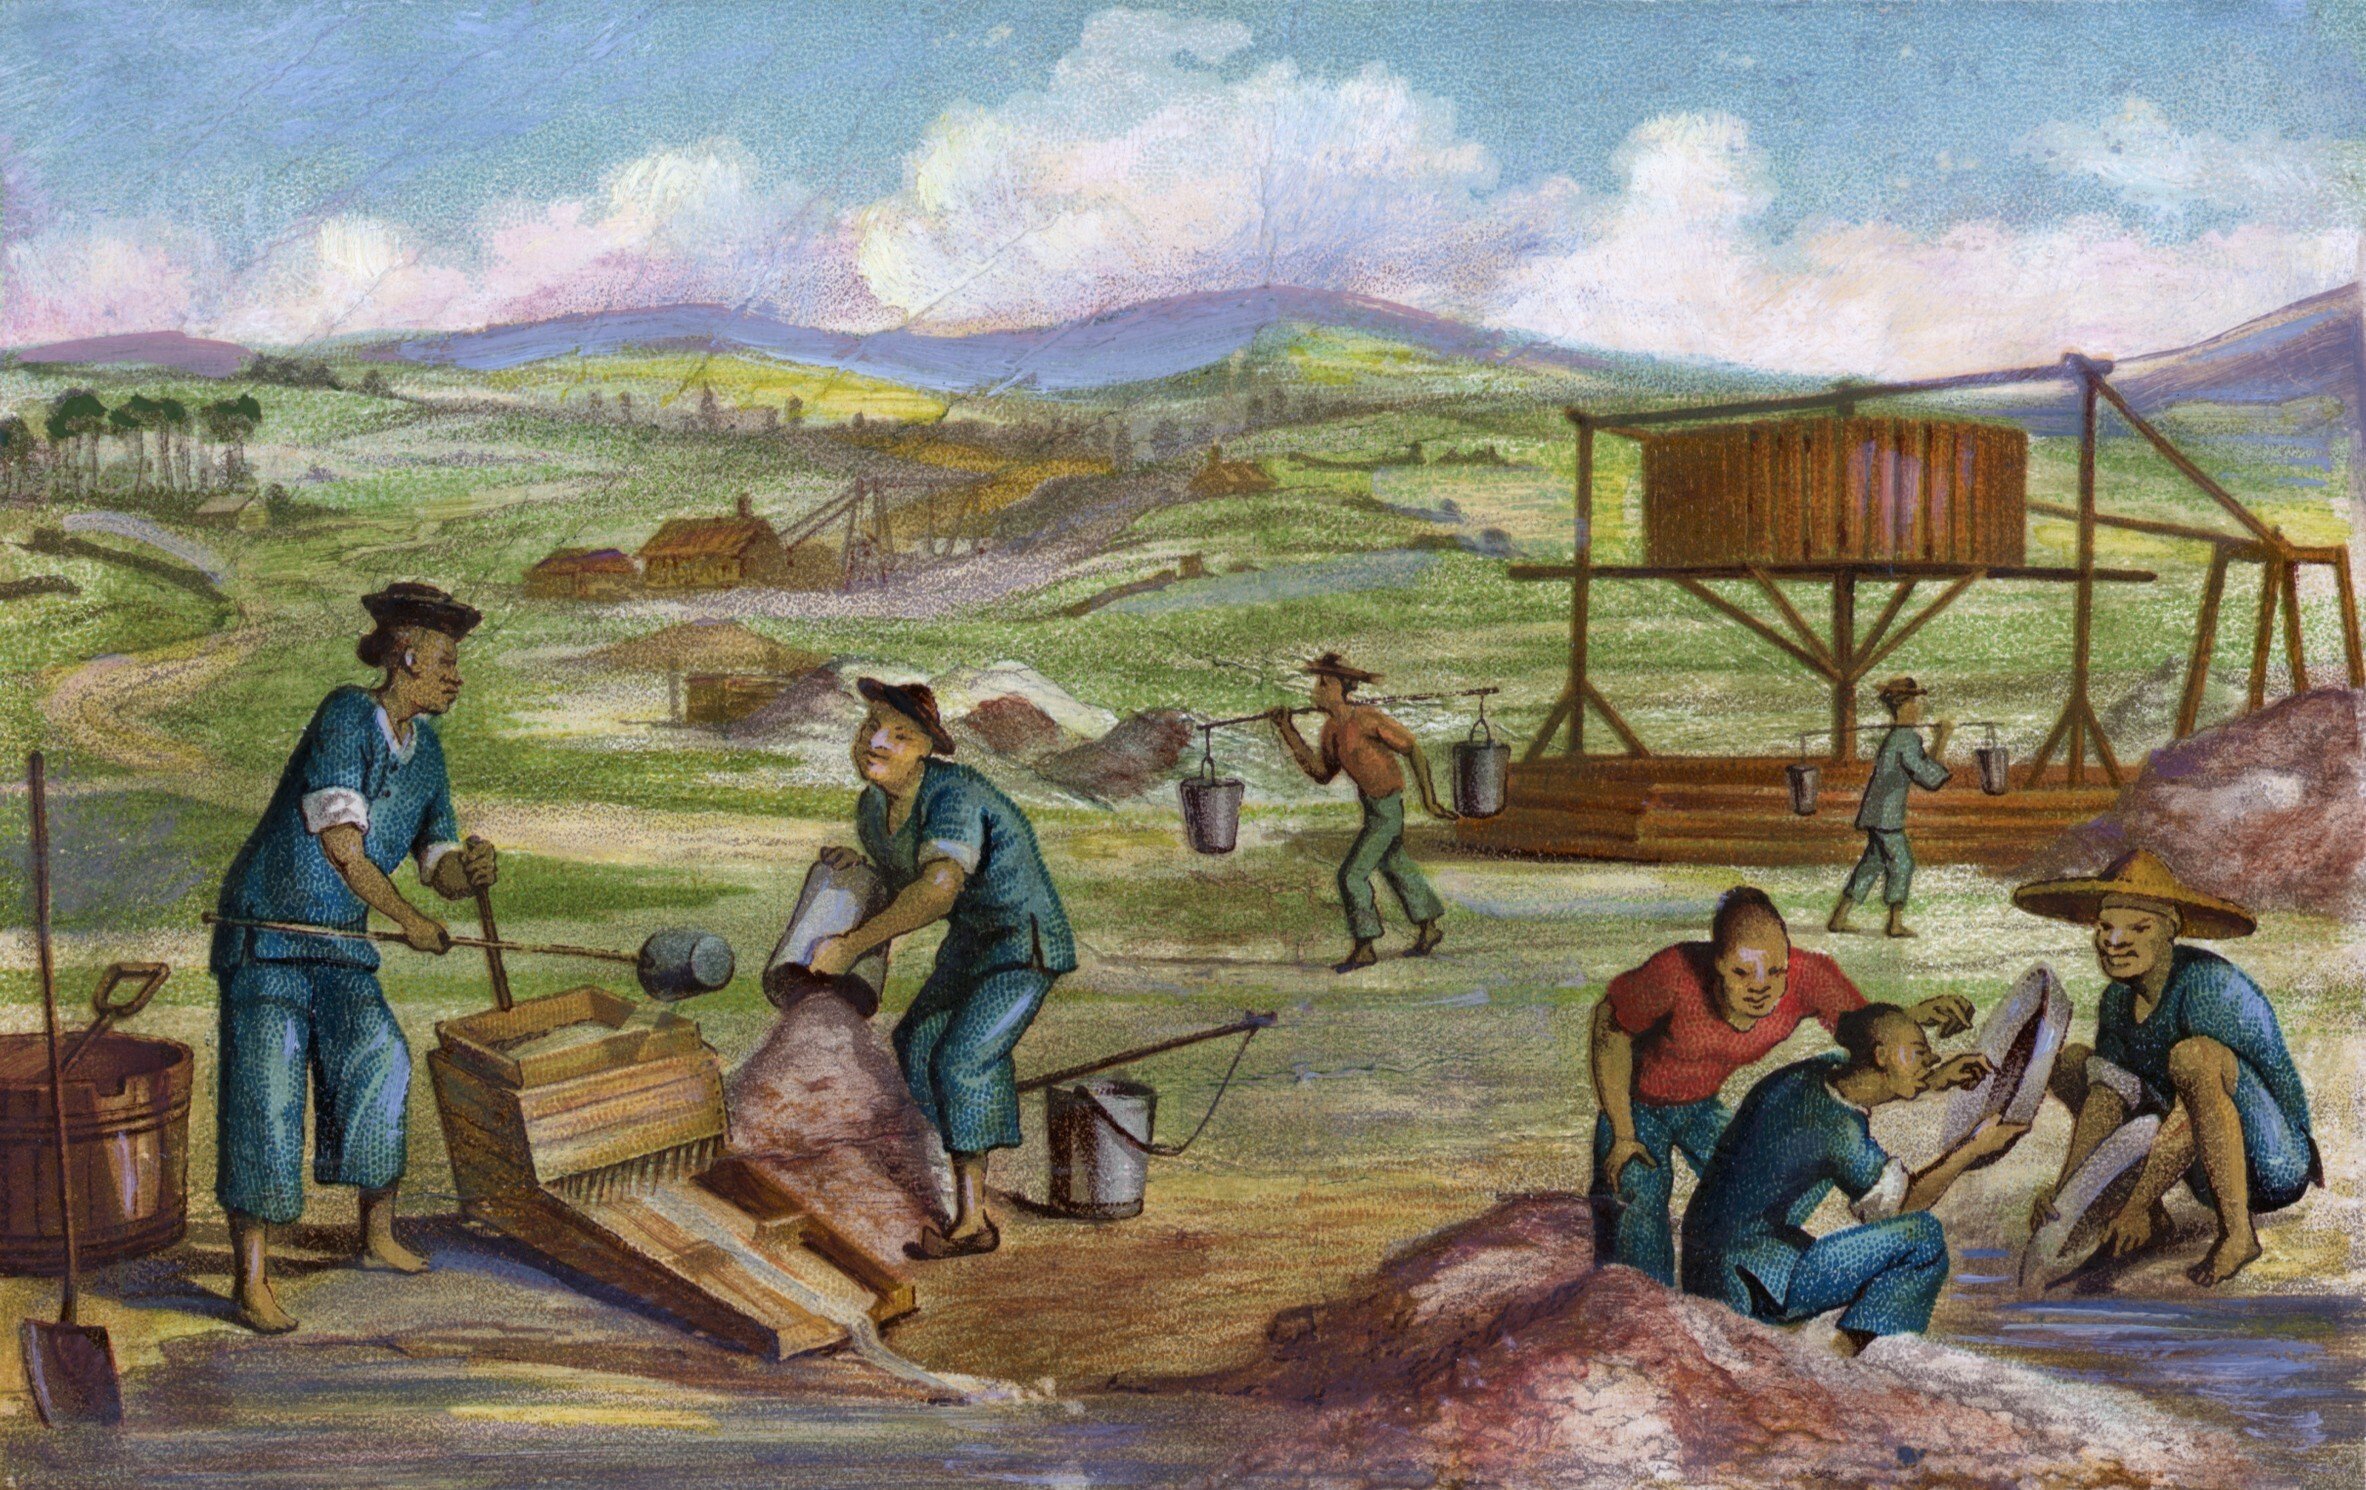 An illustration of Chinese immigrants panning for gold in California, the US, in the mid-19th century. The period forms the backdrop for new historical novel Chinese Brothers, American Sons. Photo: Getty Images